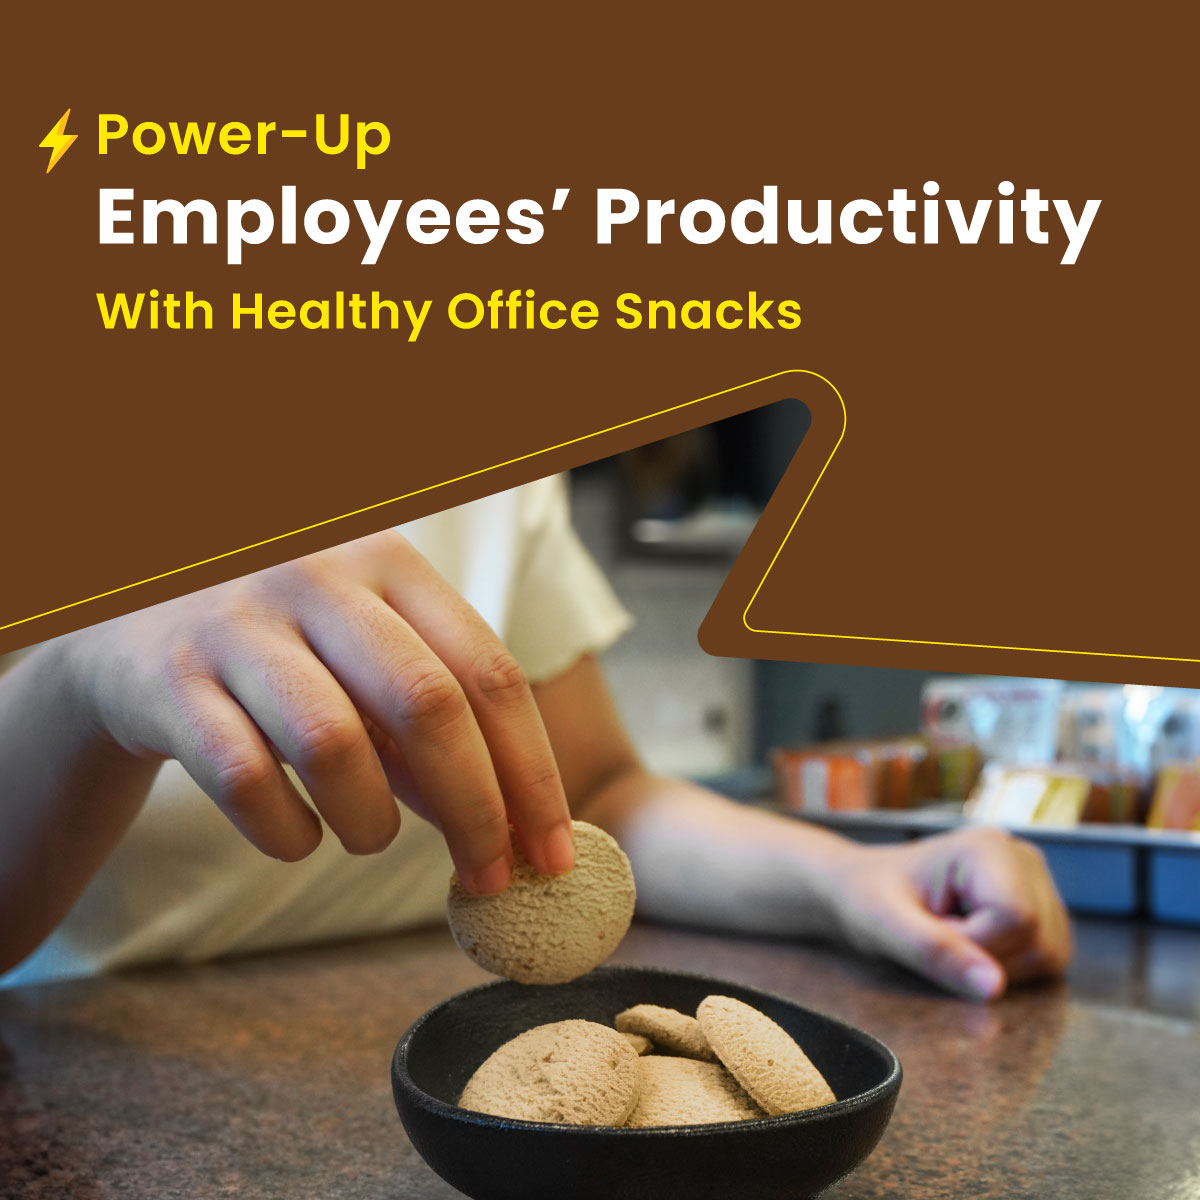 kiru millet healthy office snacks for employees' productivity at workplace